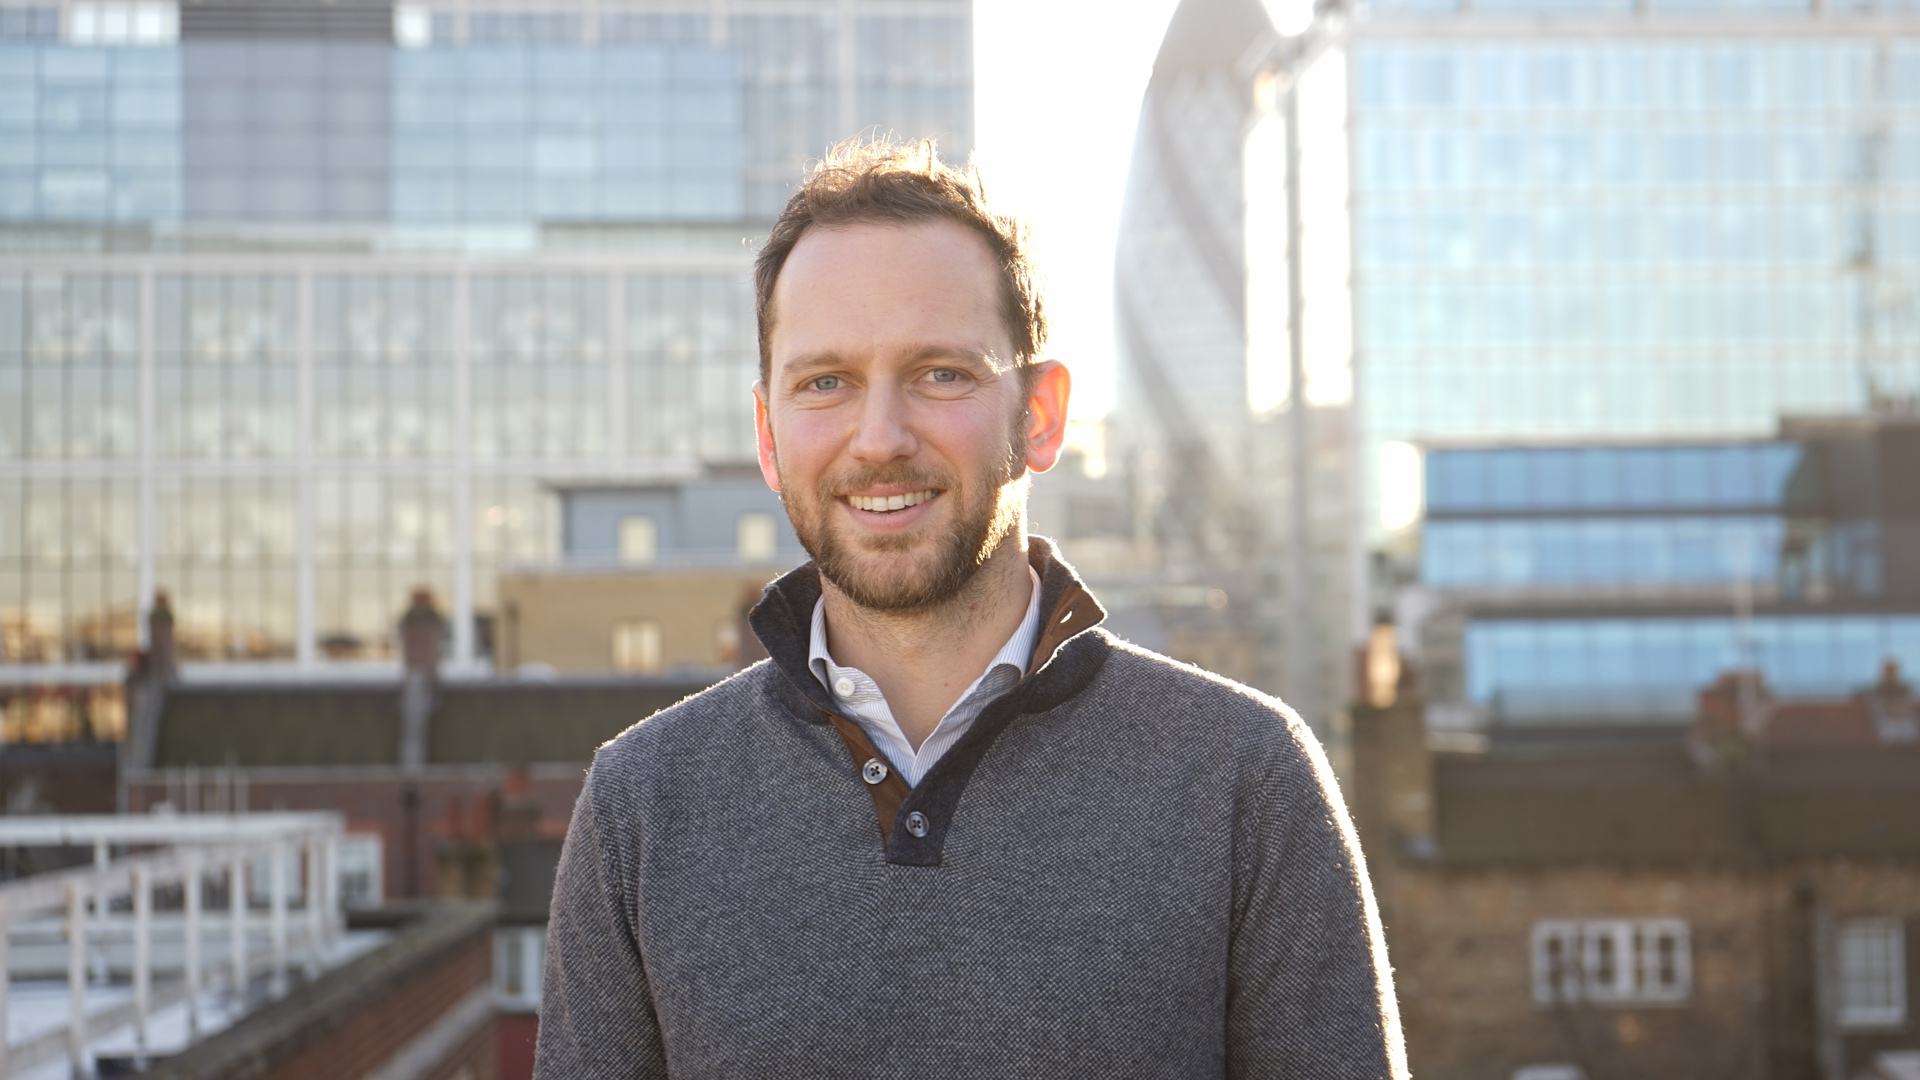 Hunted’s James Silverman joins us for a Q&A on Attracting Talent into The Recruitment Industry